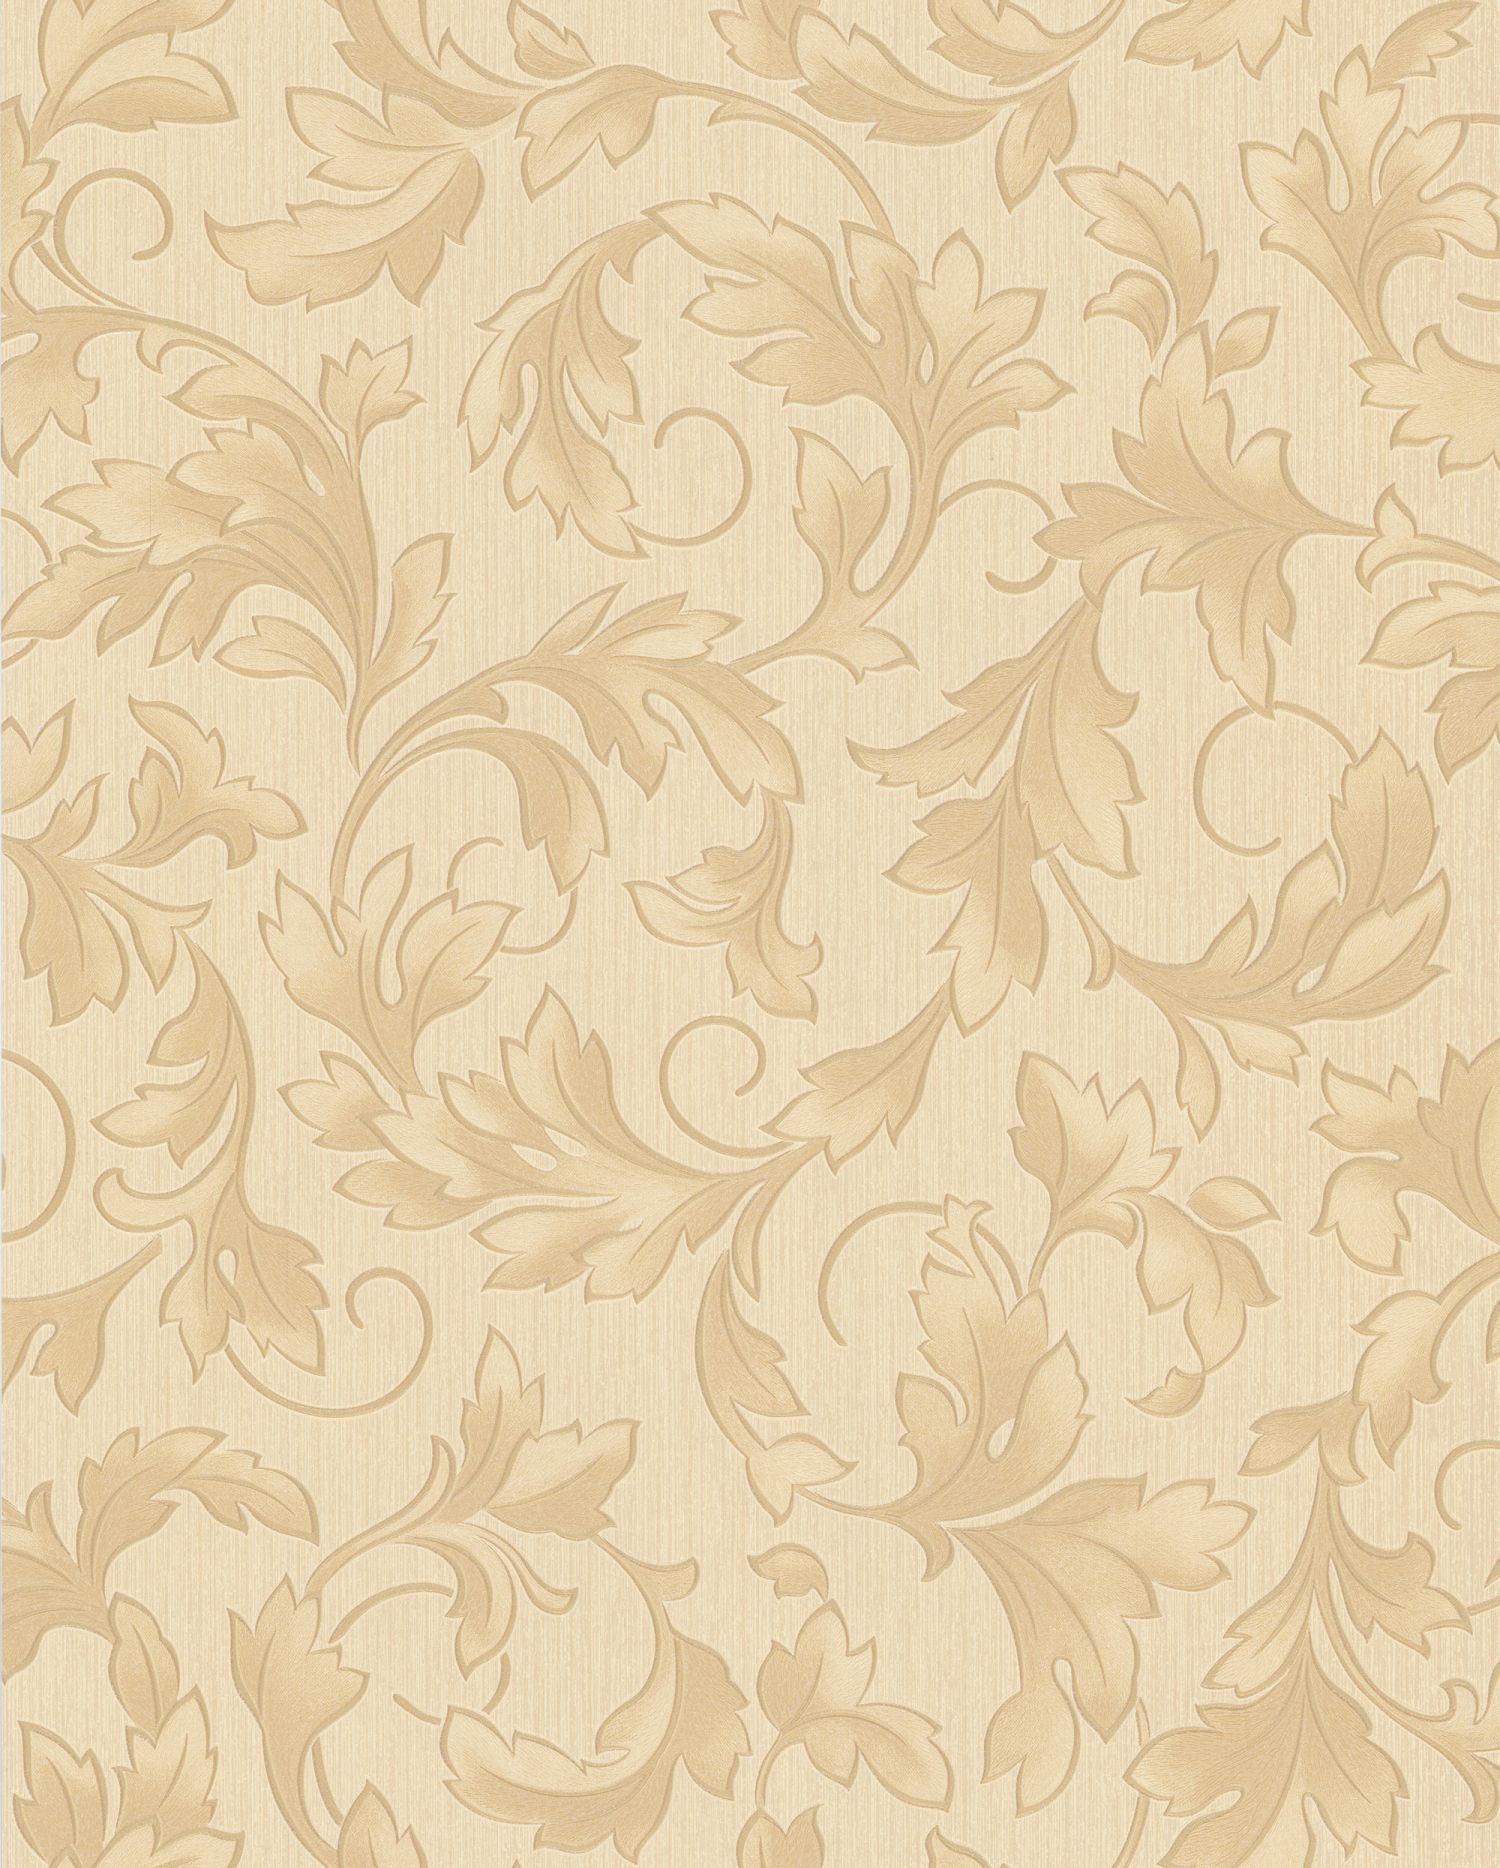 brown and gold wallpaper,wallpaper,pattern,beige,wrapping paper,floral design